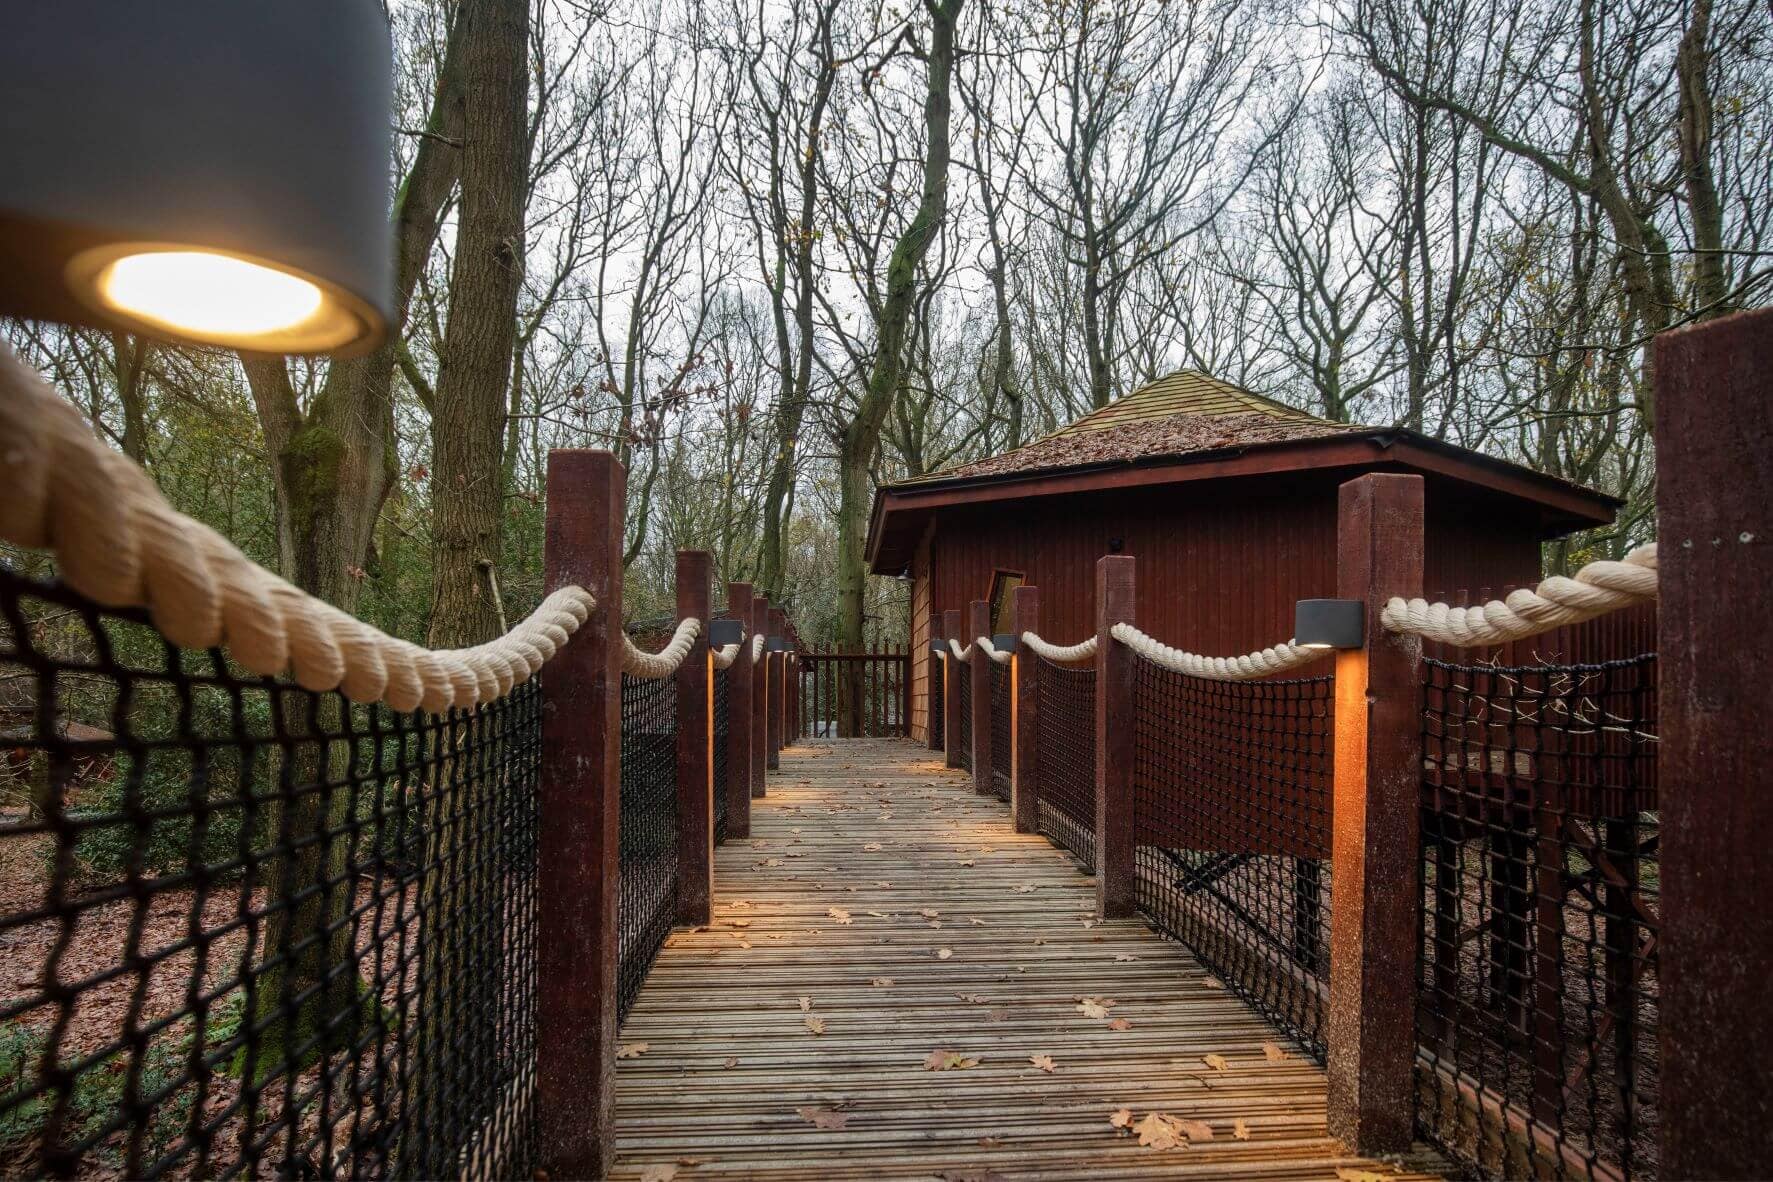 Forest Holidays in Delamere installed Marley Citideck